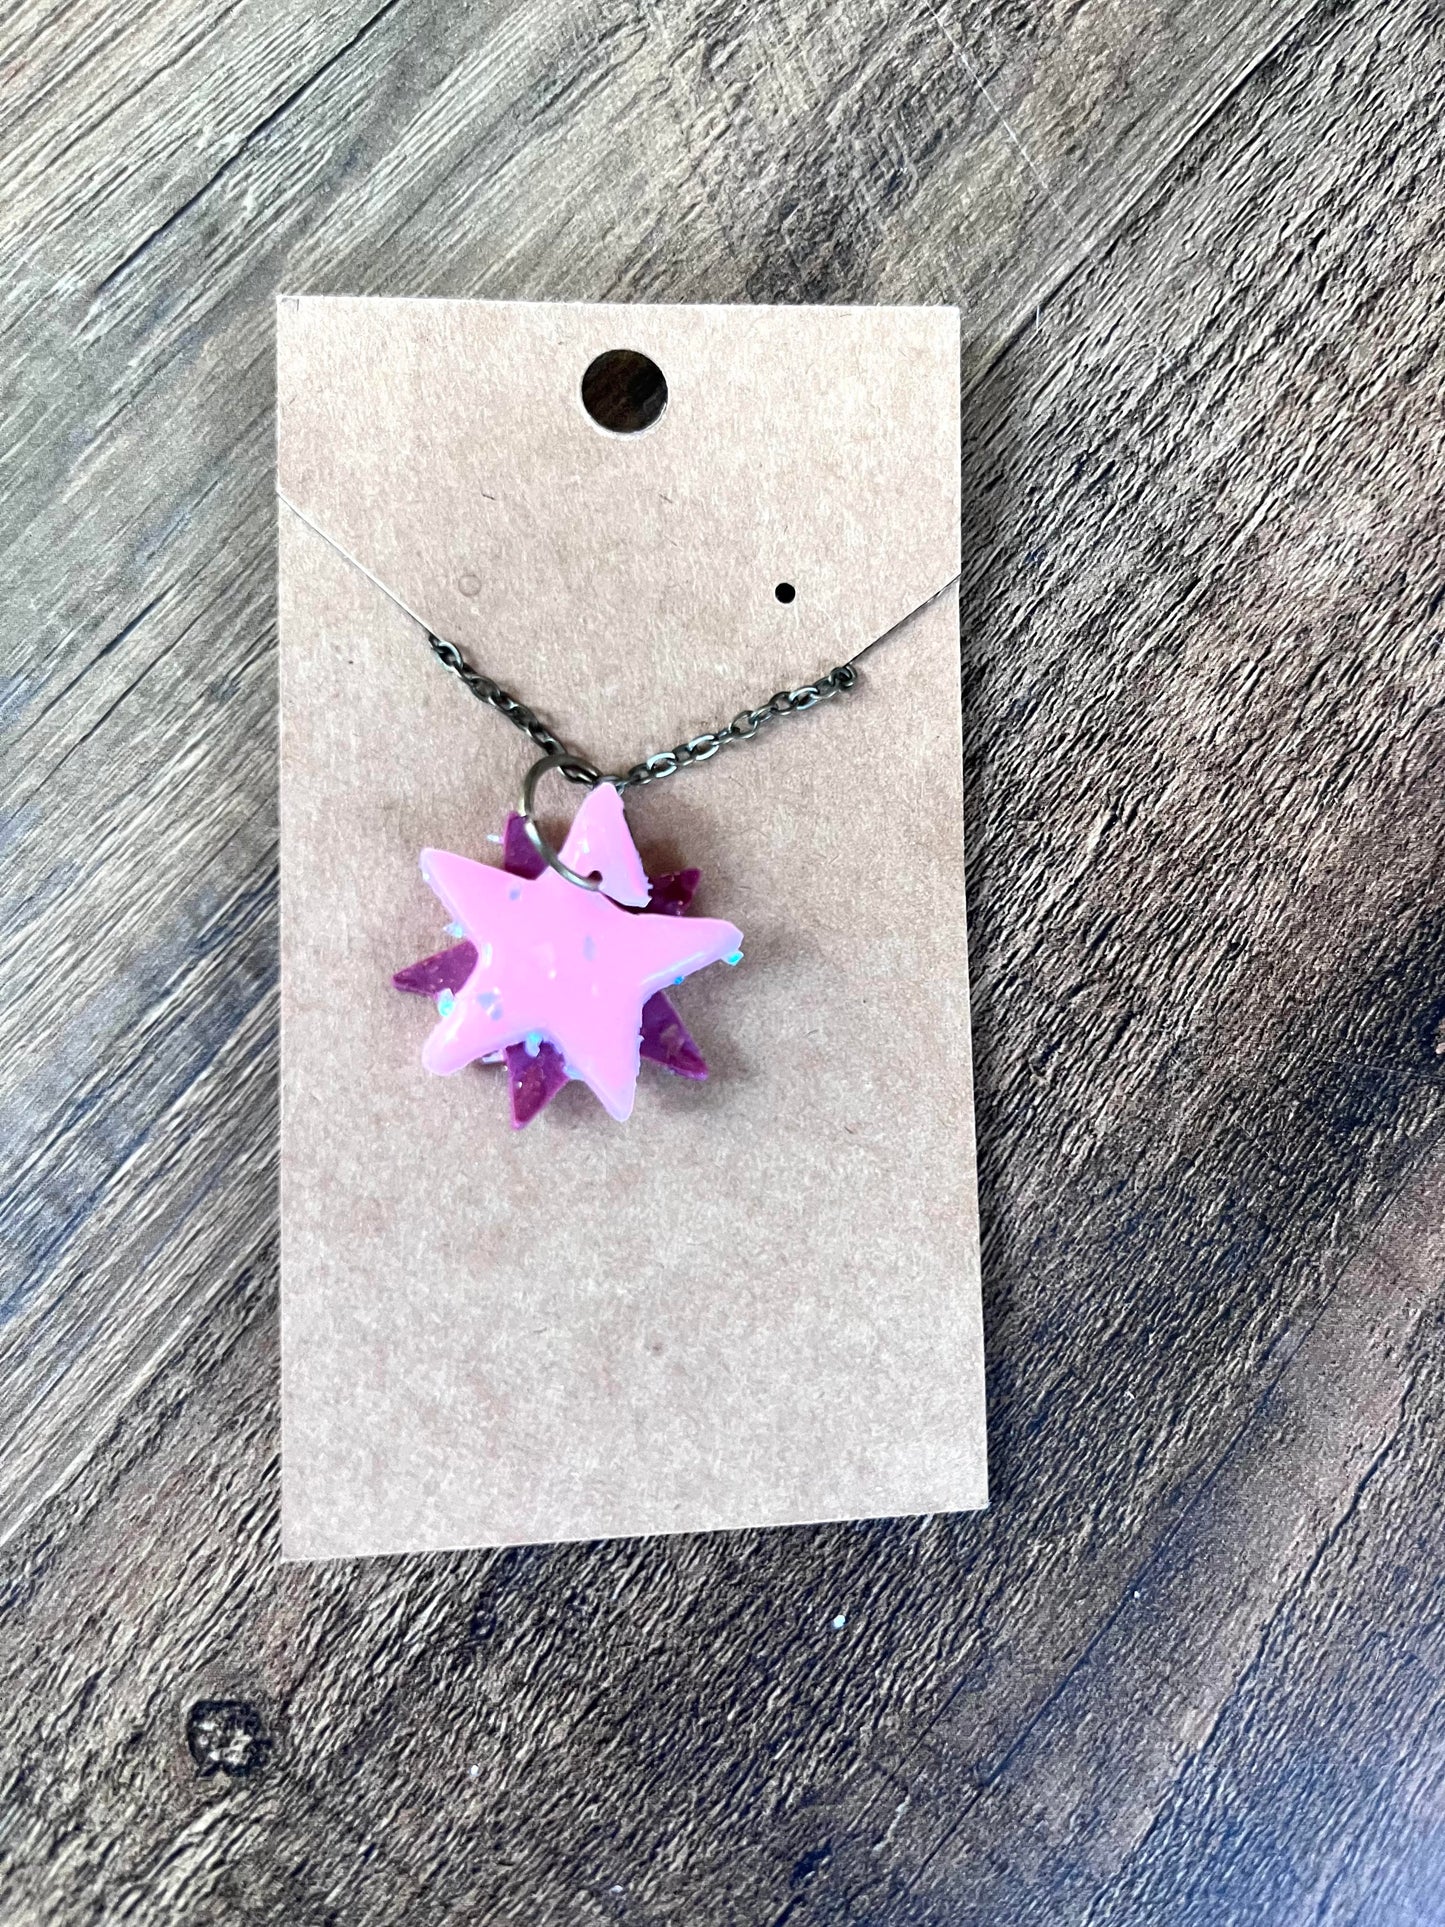 Clay Jewelry in "Pink Star" Collection